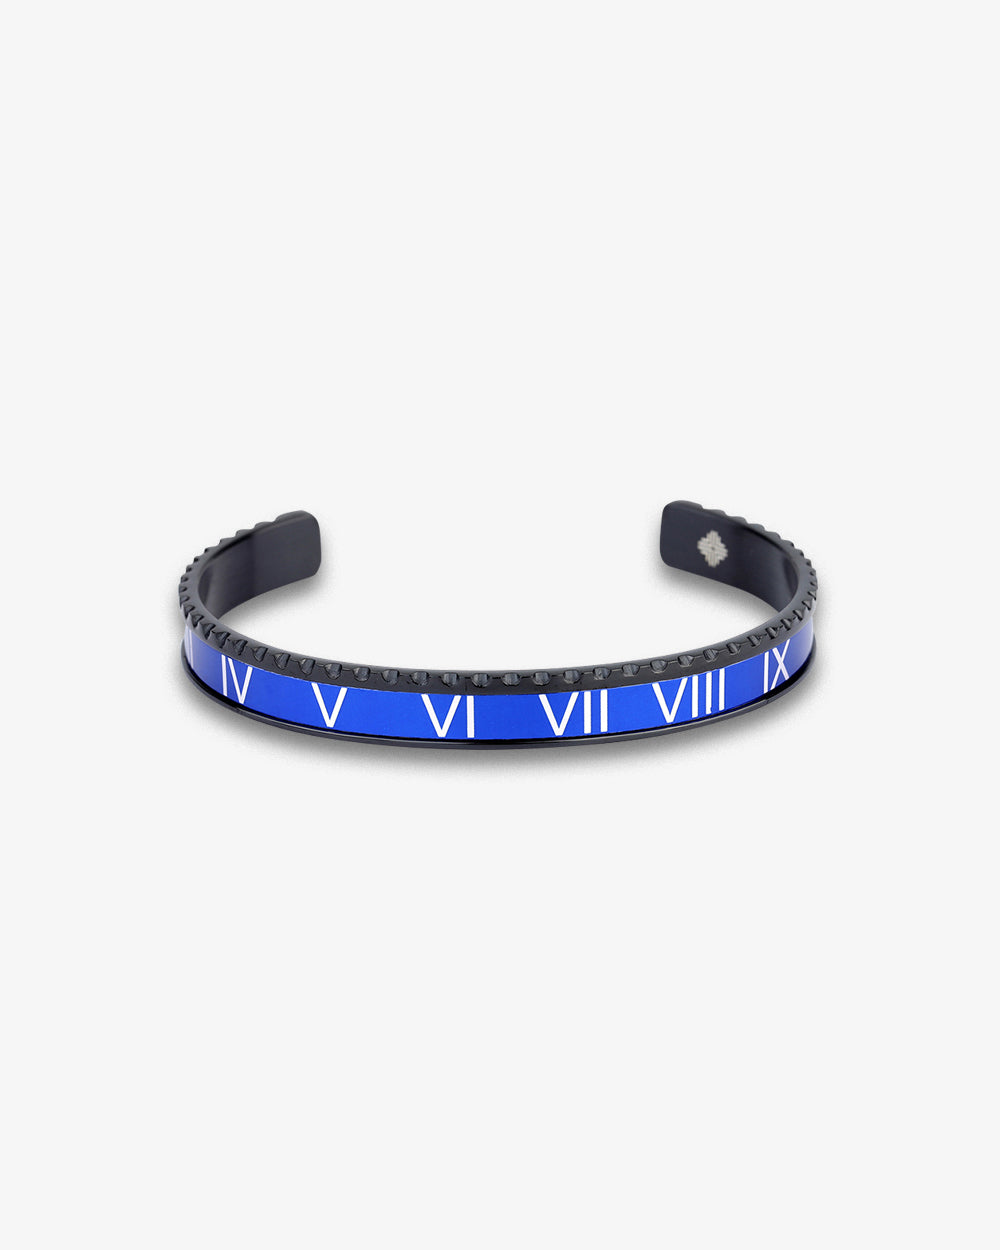 Swiss Concept Classic Roman Numeral Speed Bracelet (Blue & Black Gold) - Stainless Steel